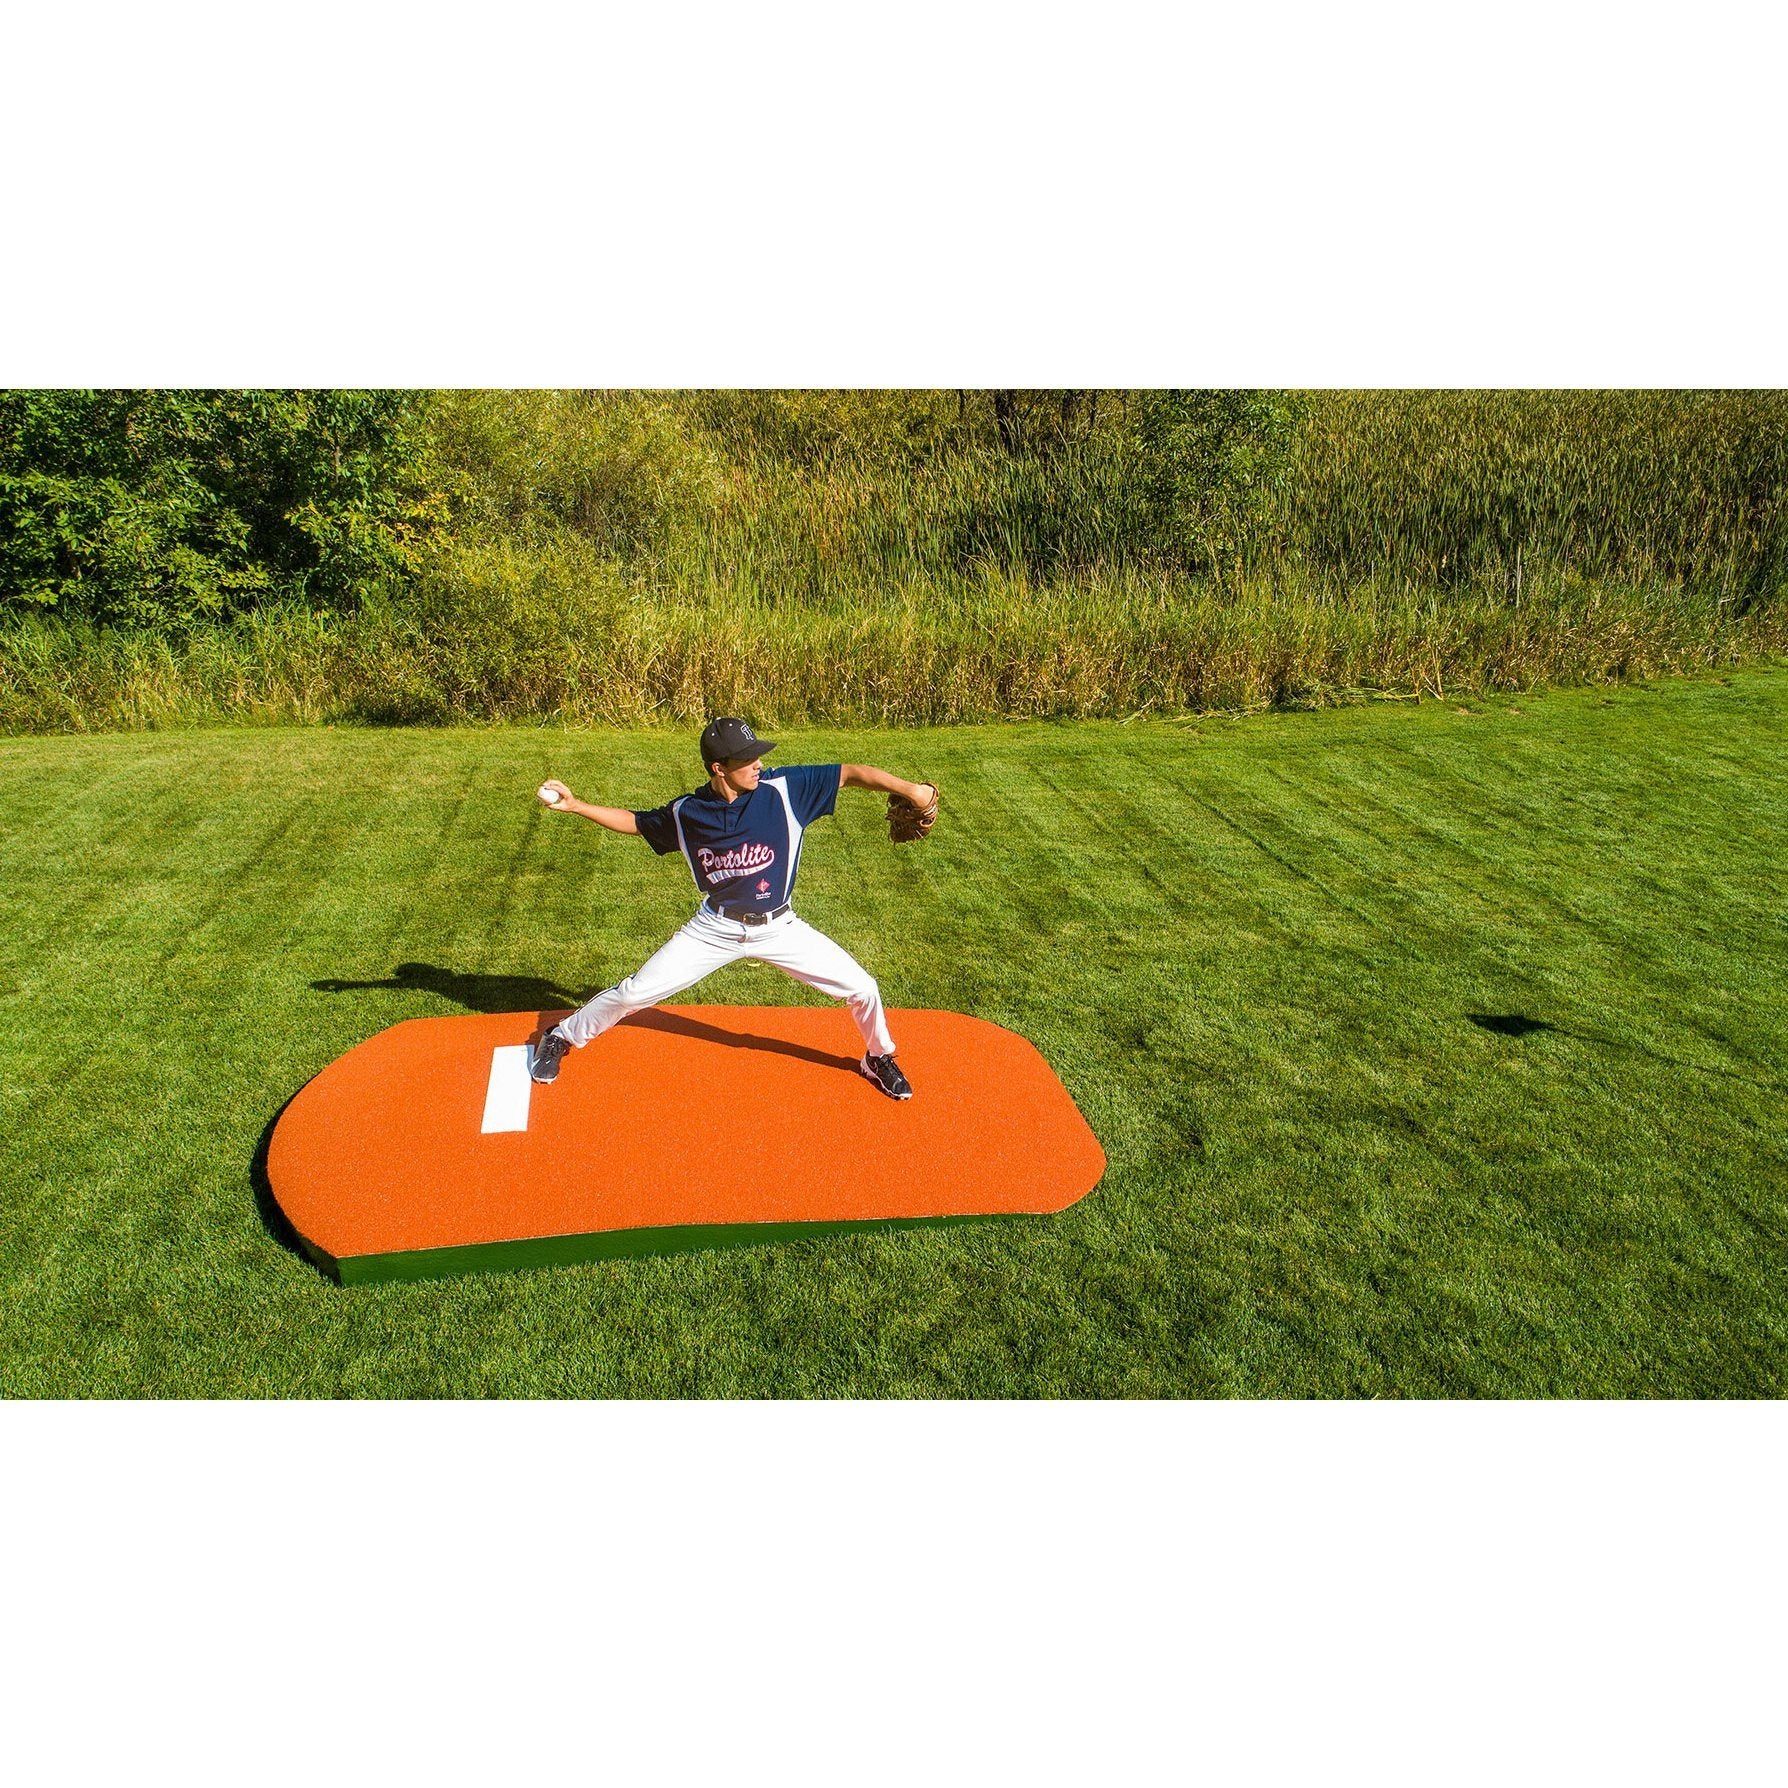 Portolite 10" Full Size Portable Practice Pitching Mound clay top view with pitcher